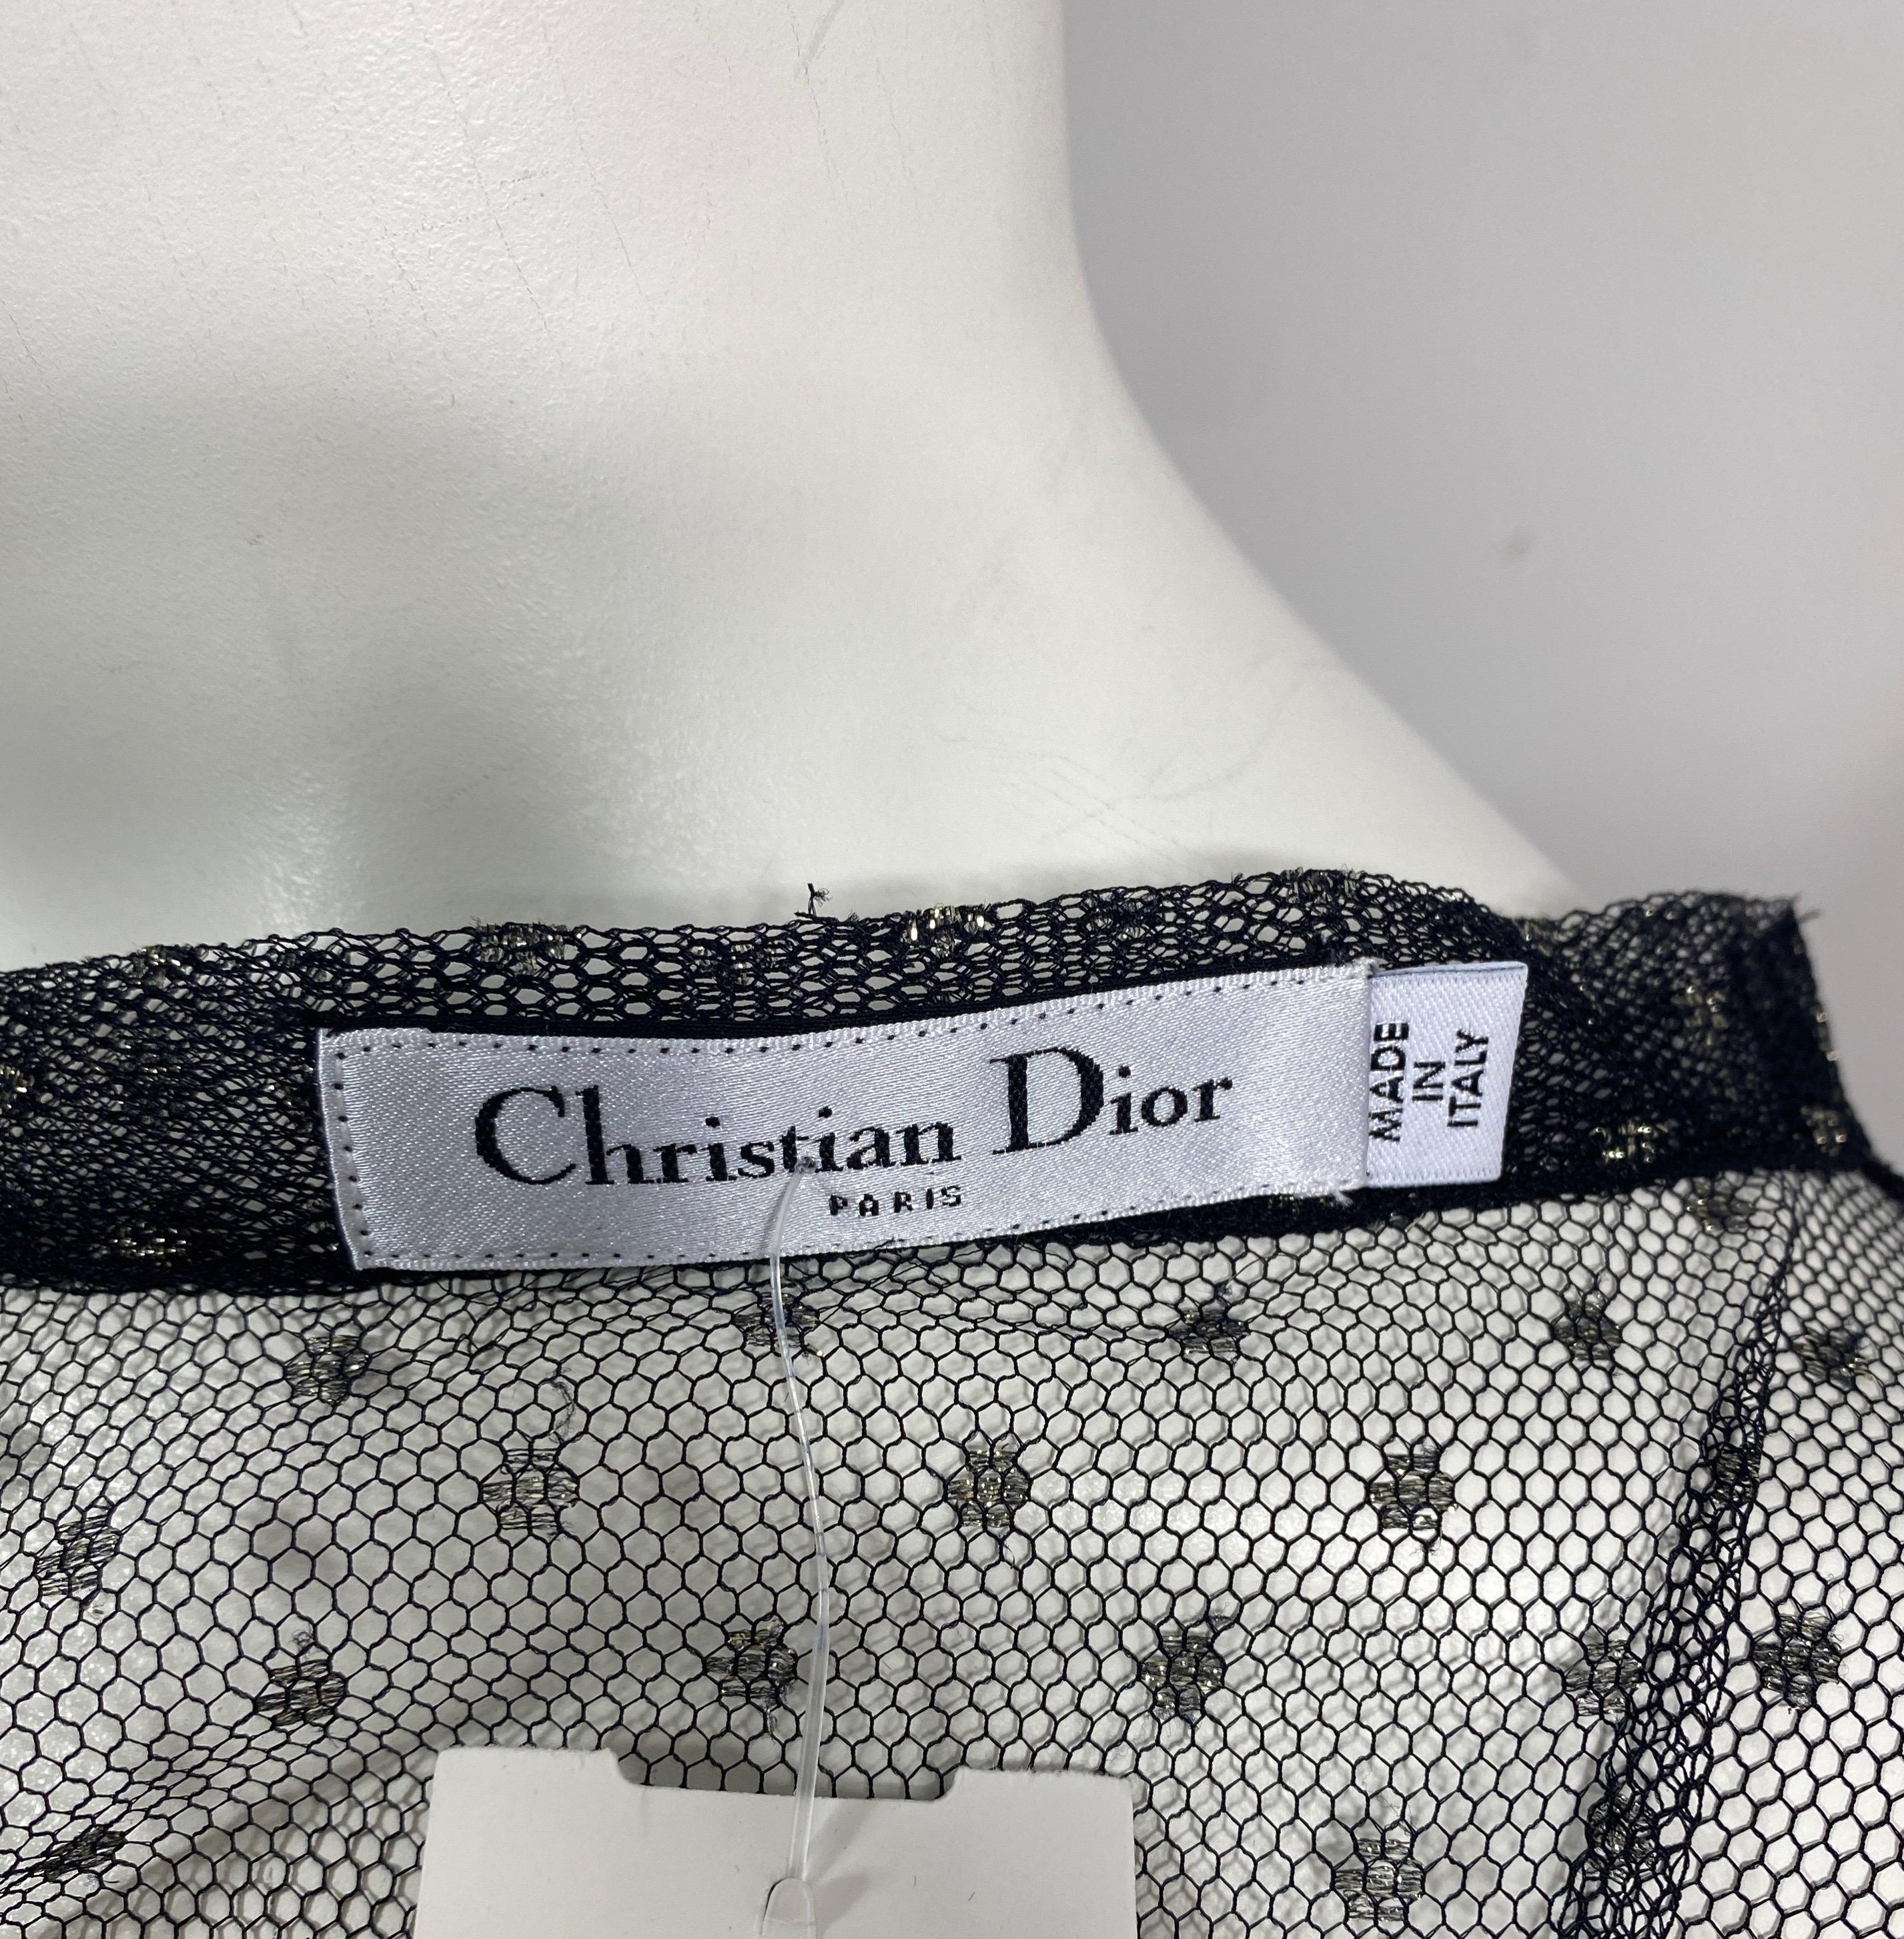 Christian Dior Black and Gold Mini Polka Dot Sheer Mesh Top - Size Small For Sale 12